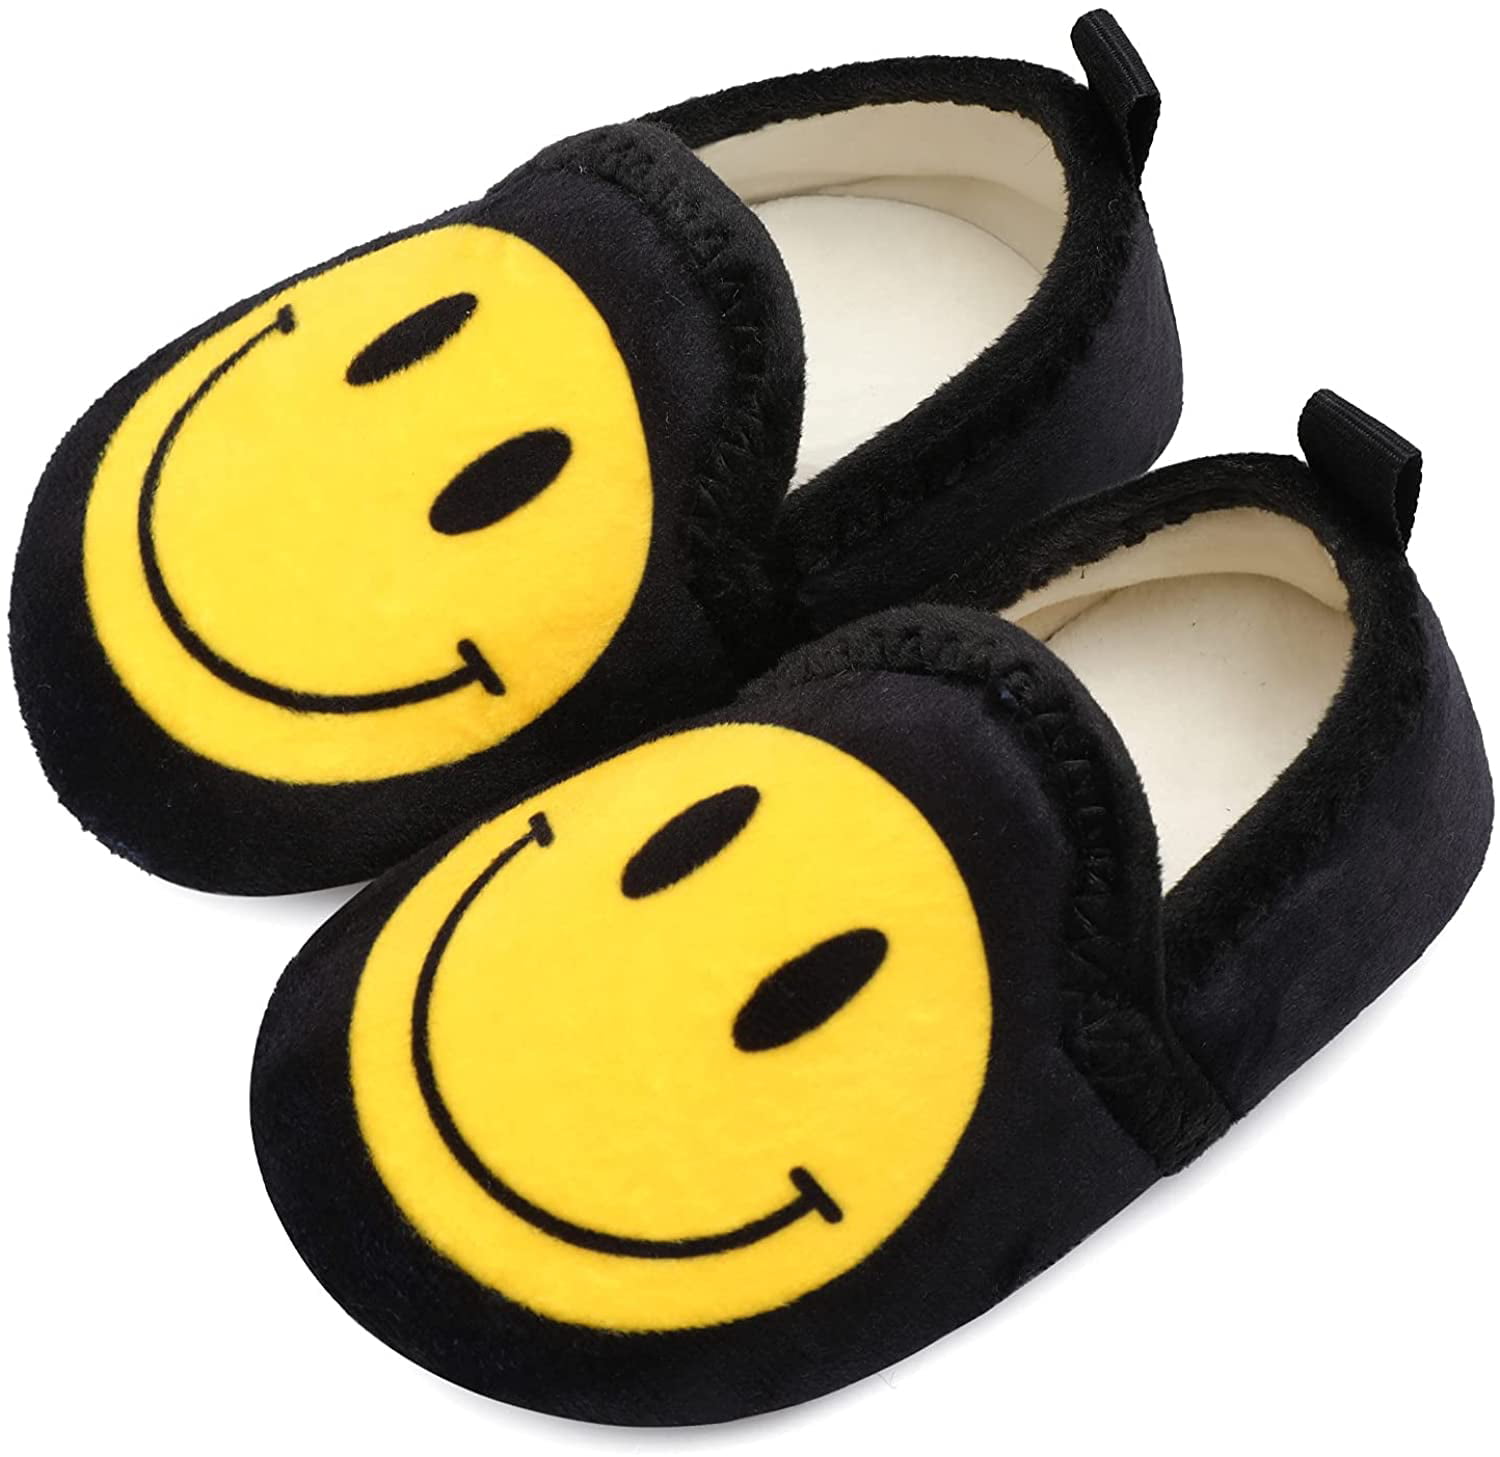 L-RUN Toddler Boys Girls House Slippers Indoor Home Shoes Warm Socks for Kids 